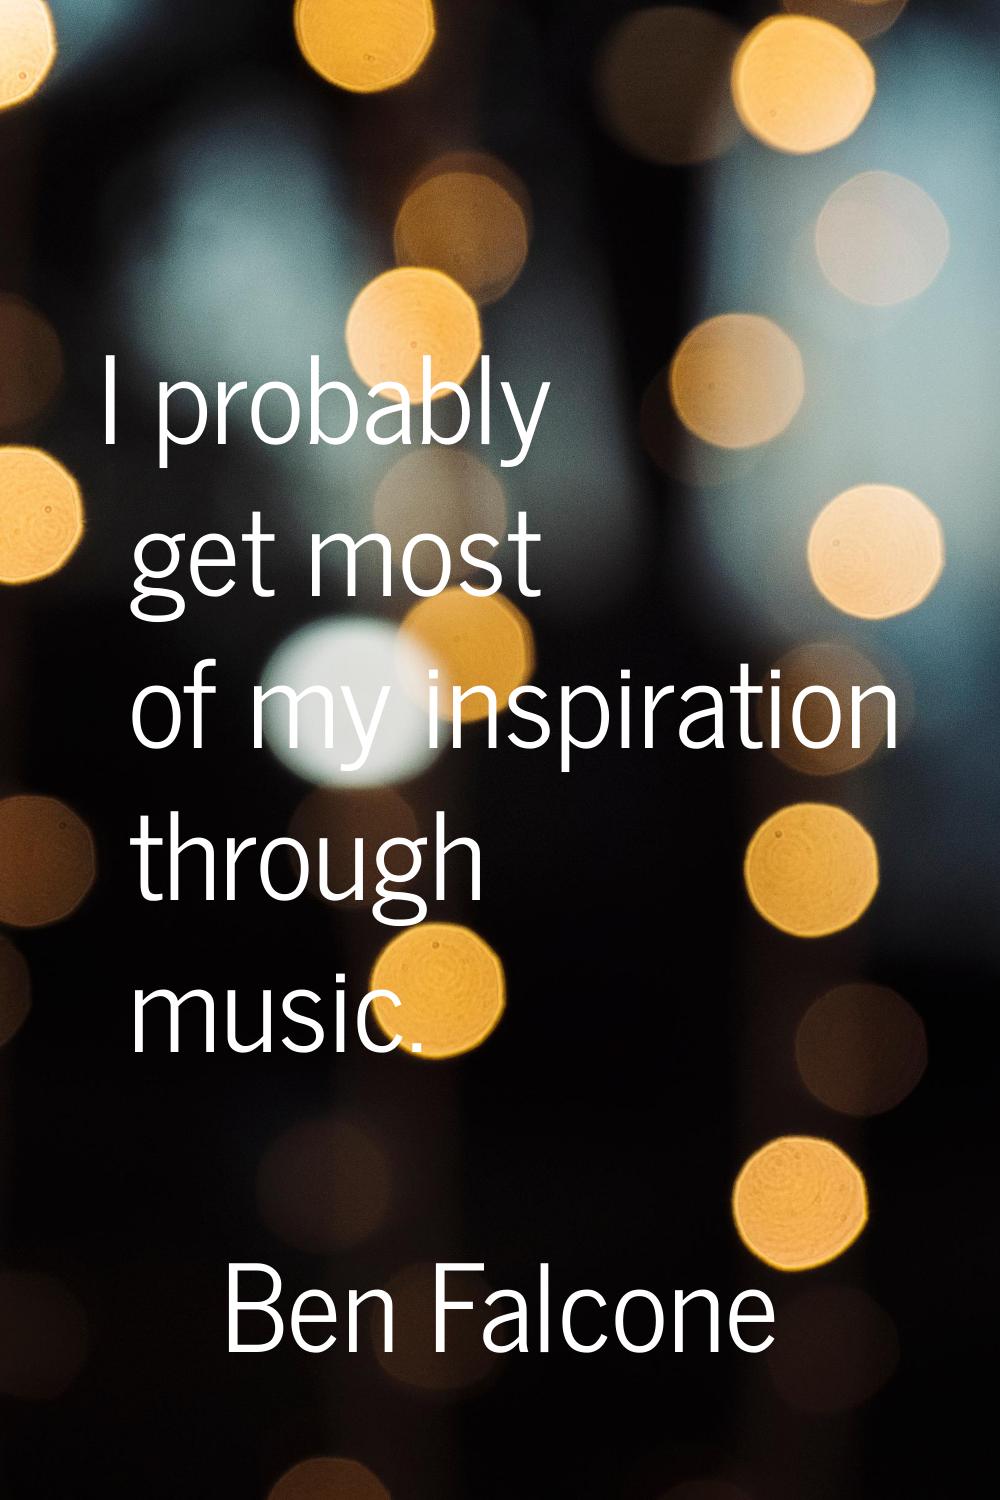 I probably get most of my inspiration through music.